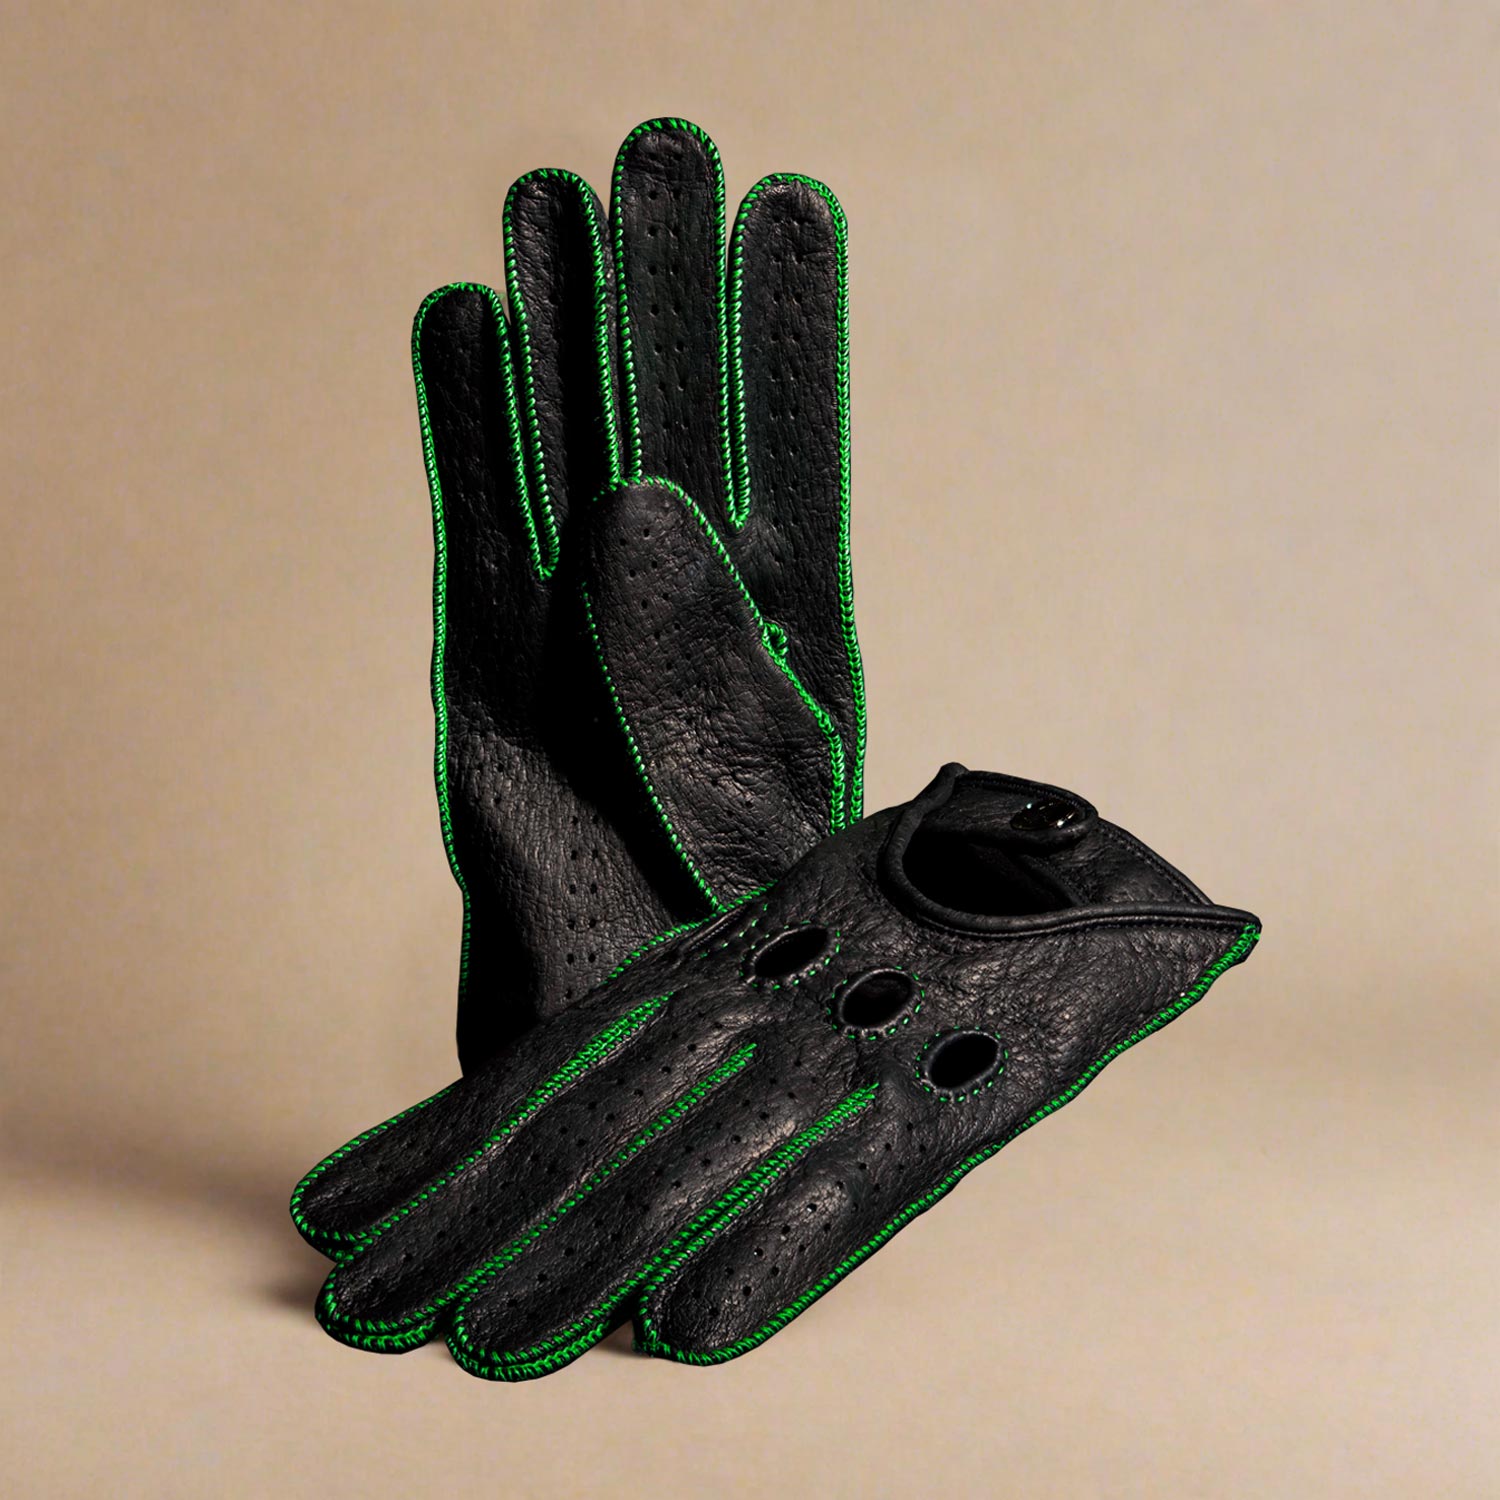 Hell Green driving gloves - made on request